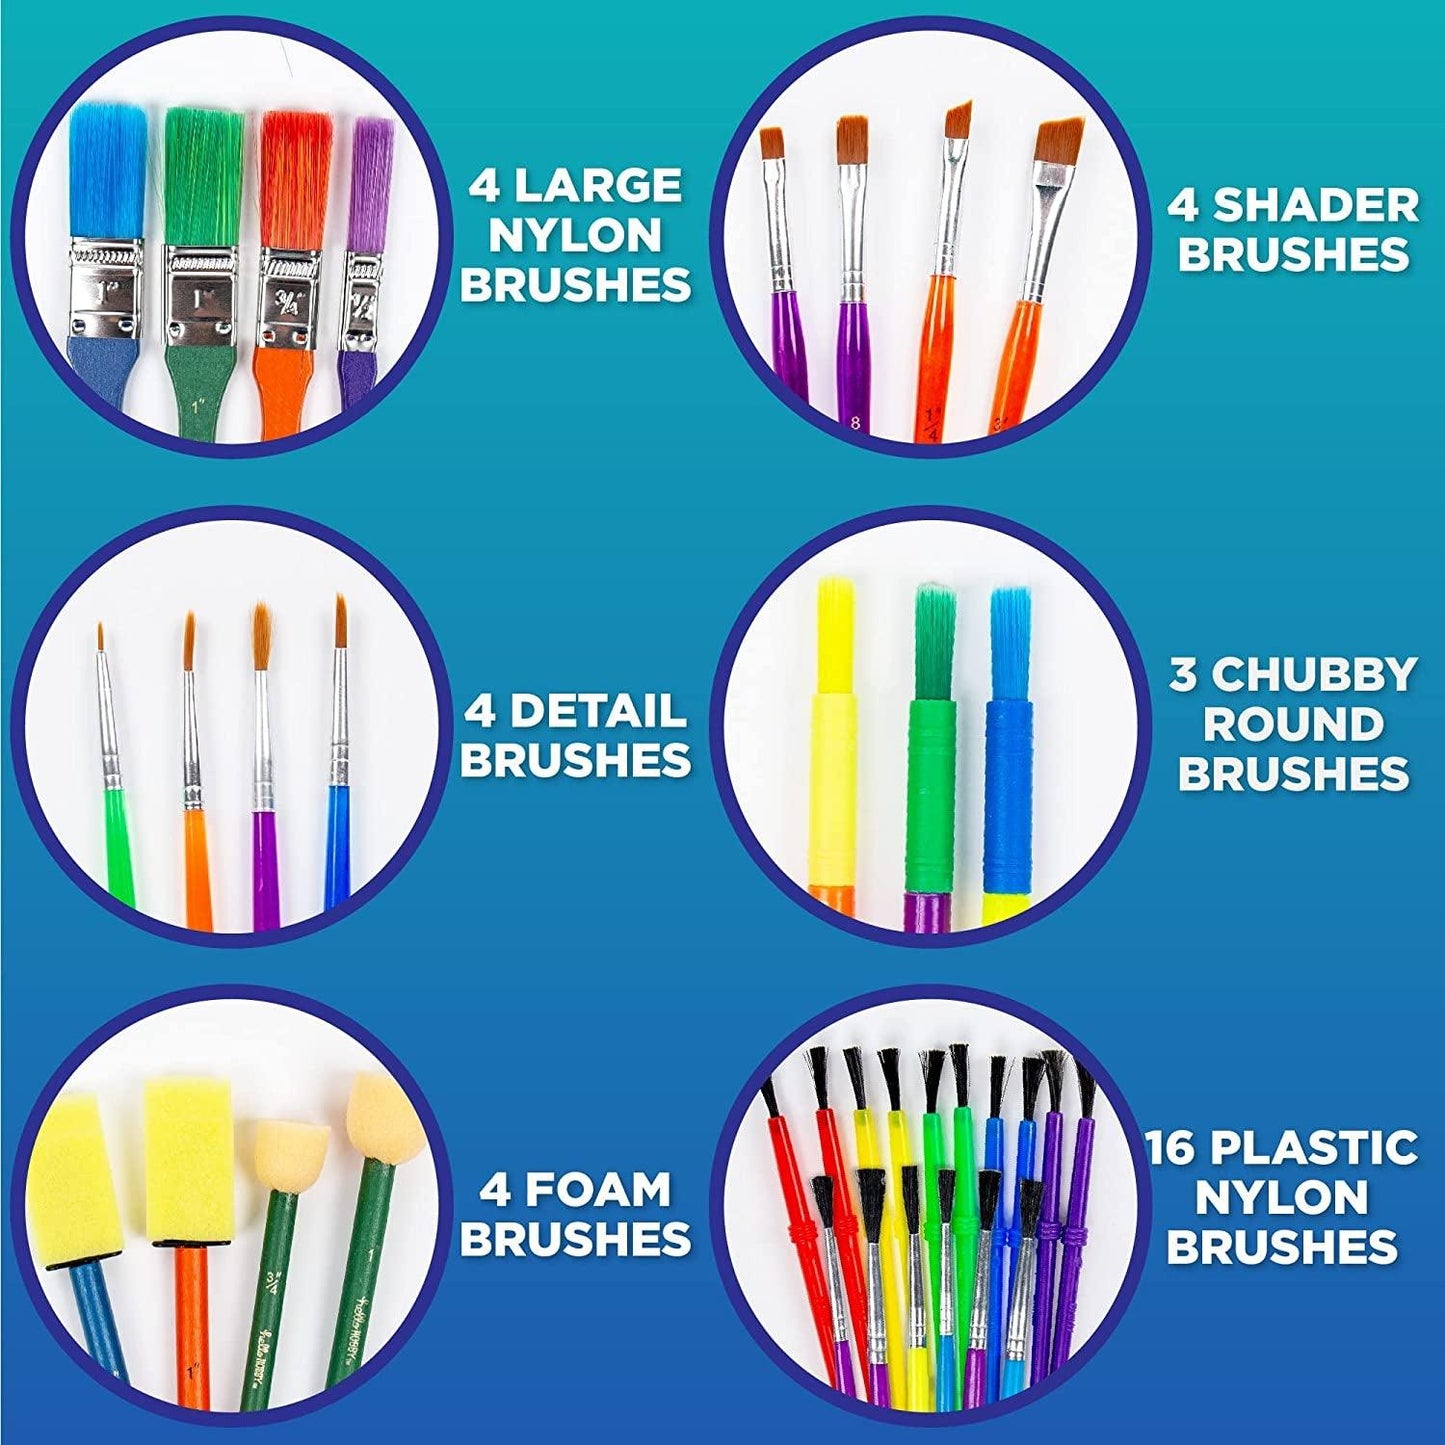 Paint Brushes -35 All Purpose Paint Brushes Value Pack – Includes 8 Different Types of Brushes - WoodArtSupply